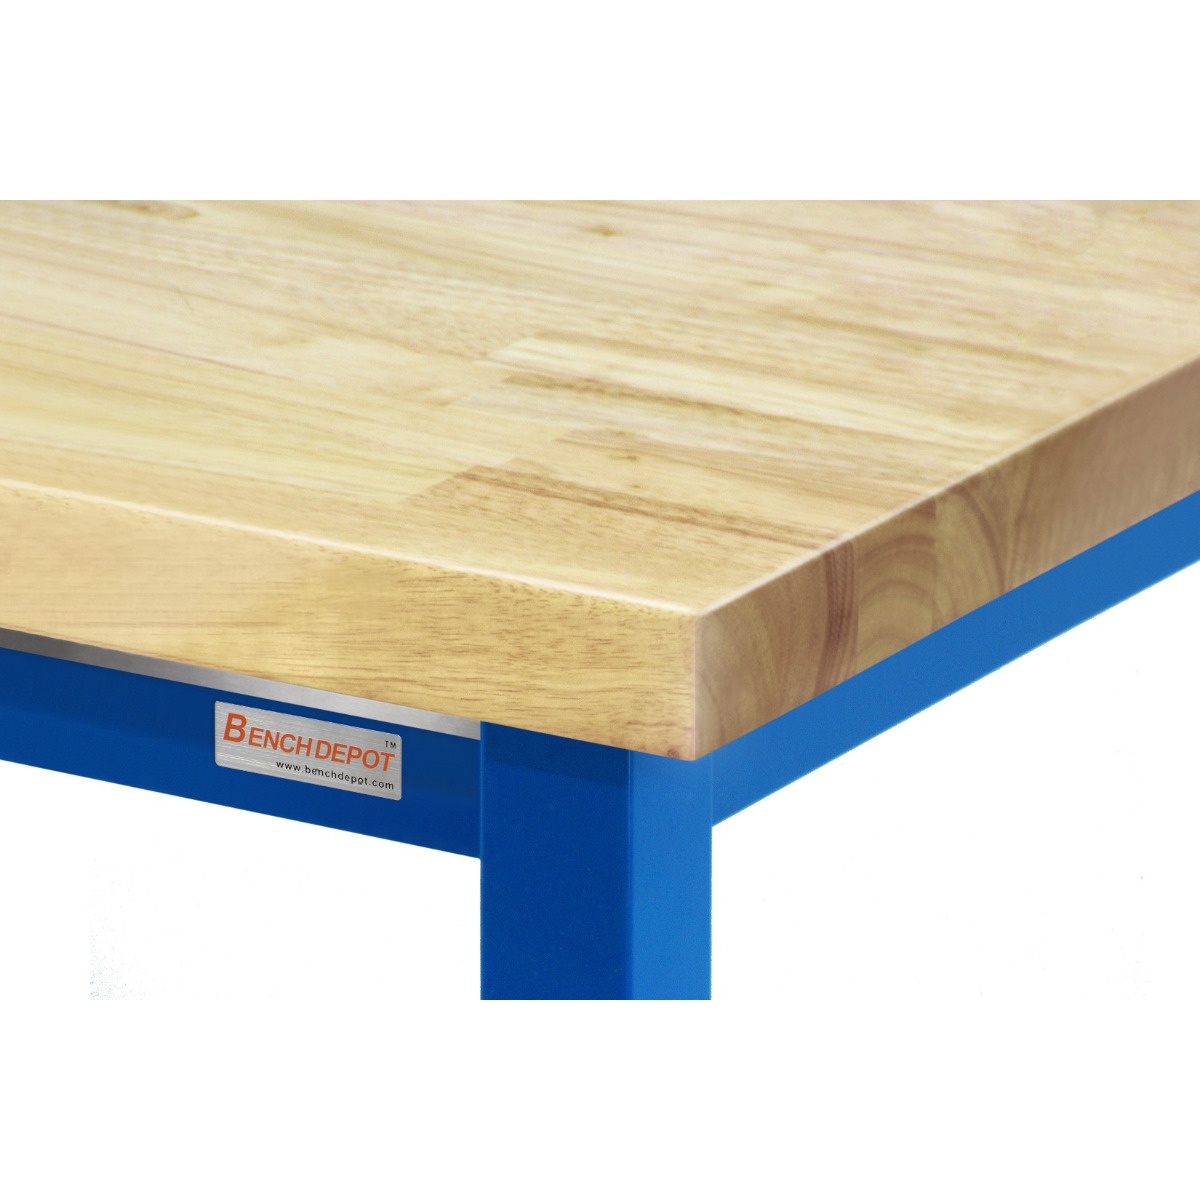 30" Wide Kennedy Benches with Lacquered Solid Maple Hardwood 1-3/4" Thick Top - Square Cut Edge